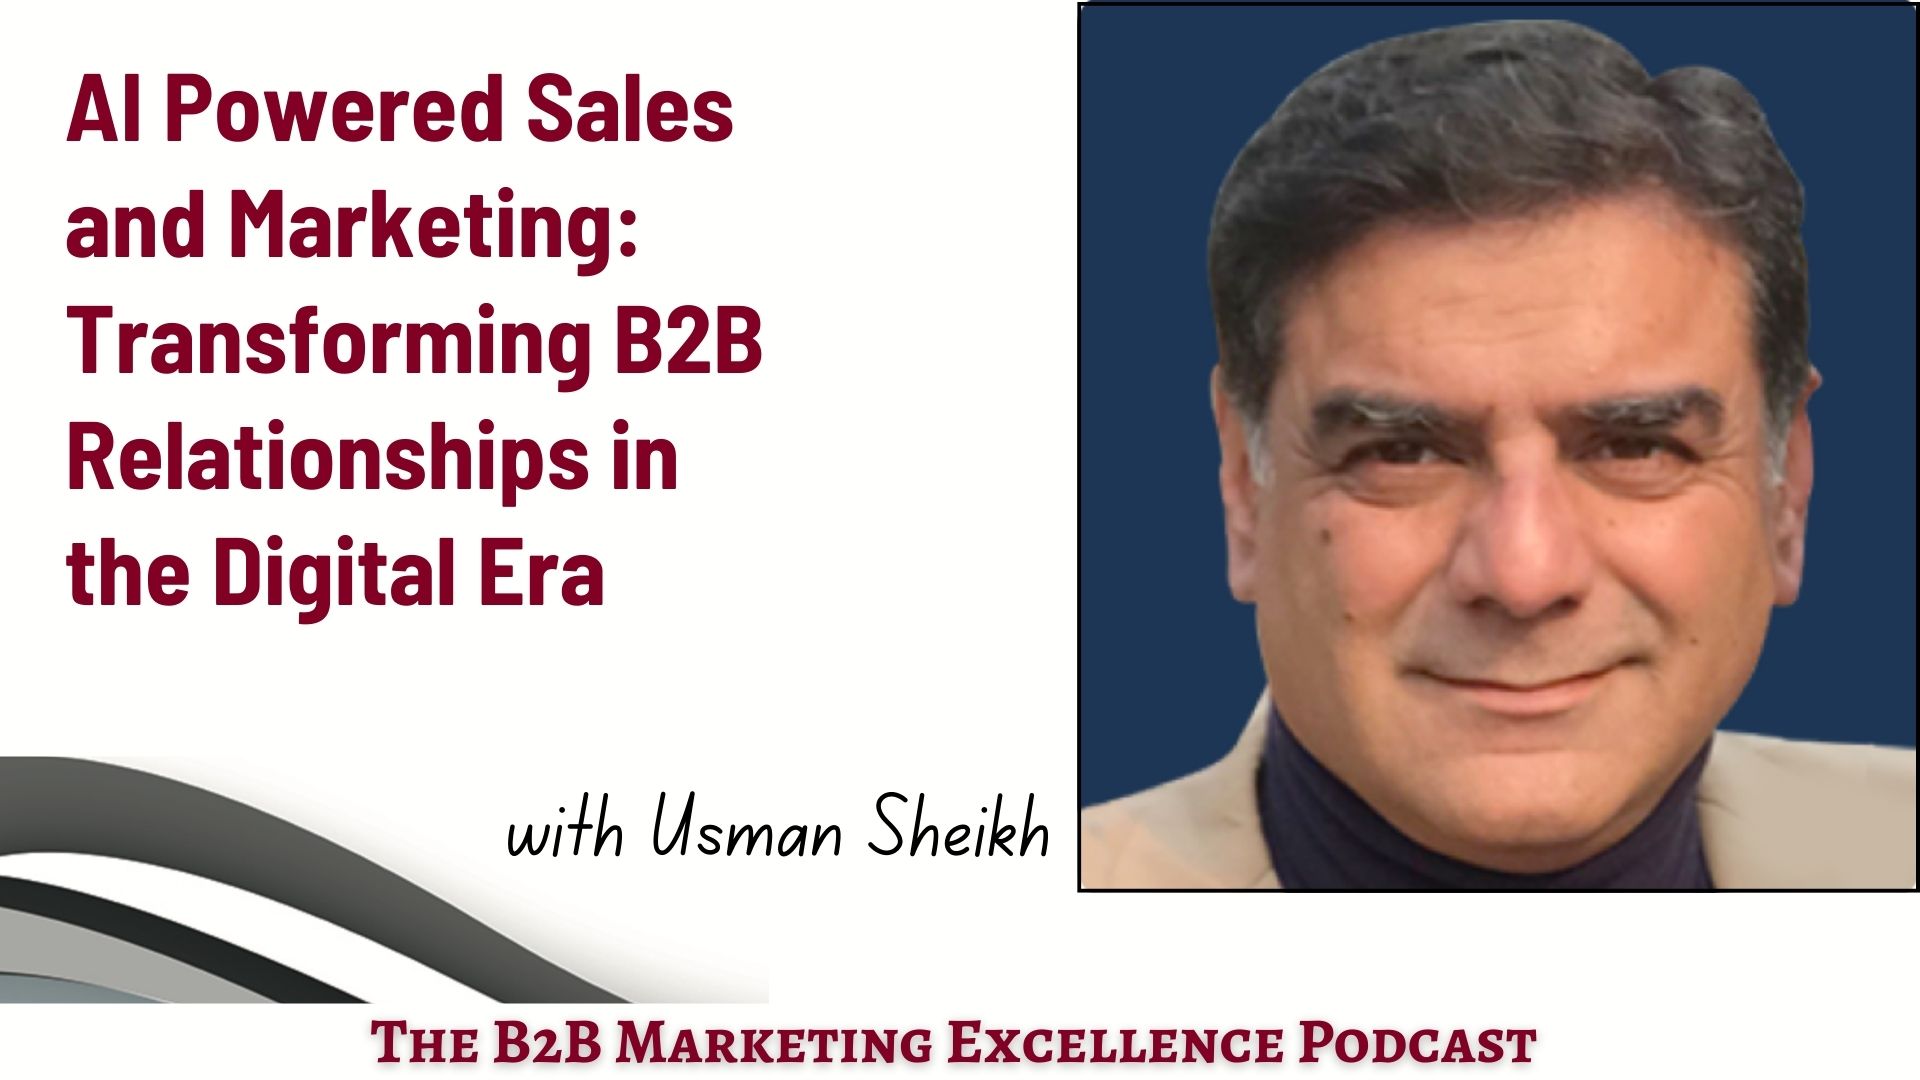 Podcast – AI Powered Sales and Marketing: Transforming B2B Relationships in the Digital Era